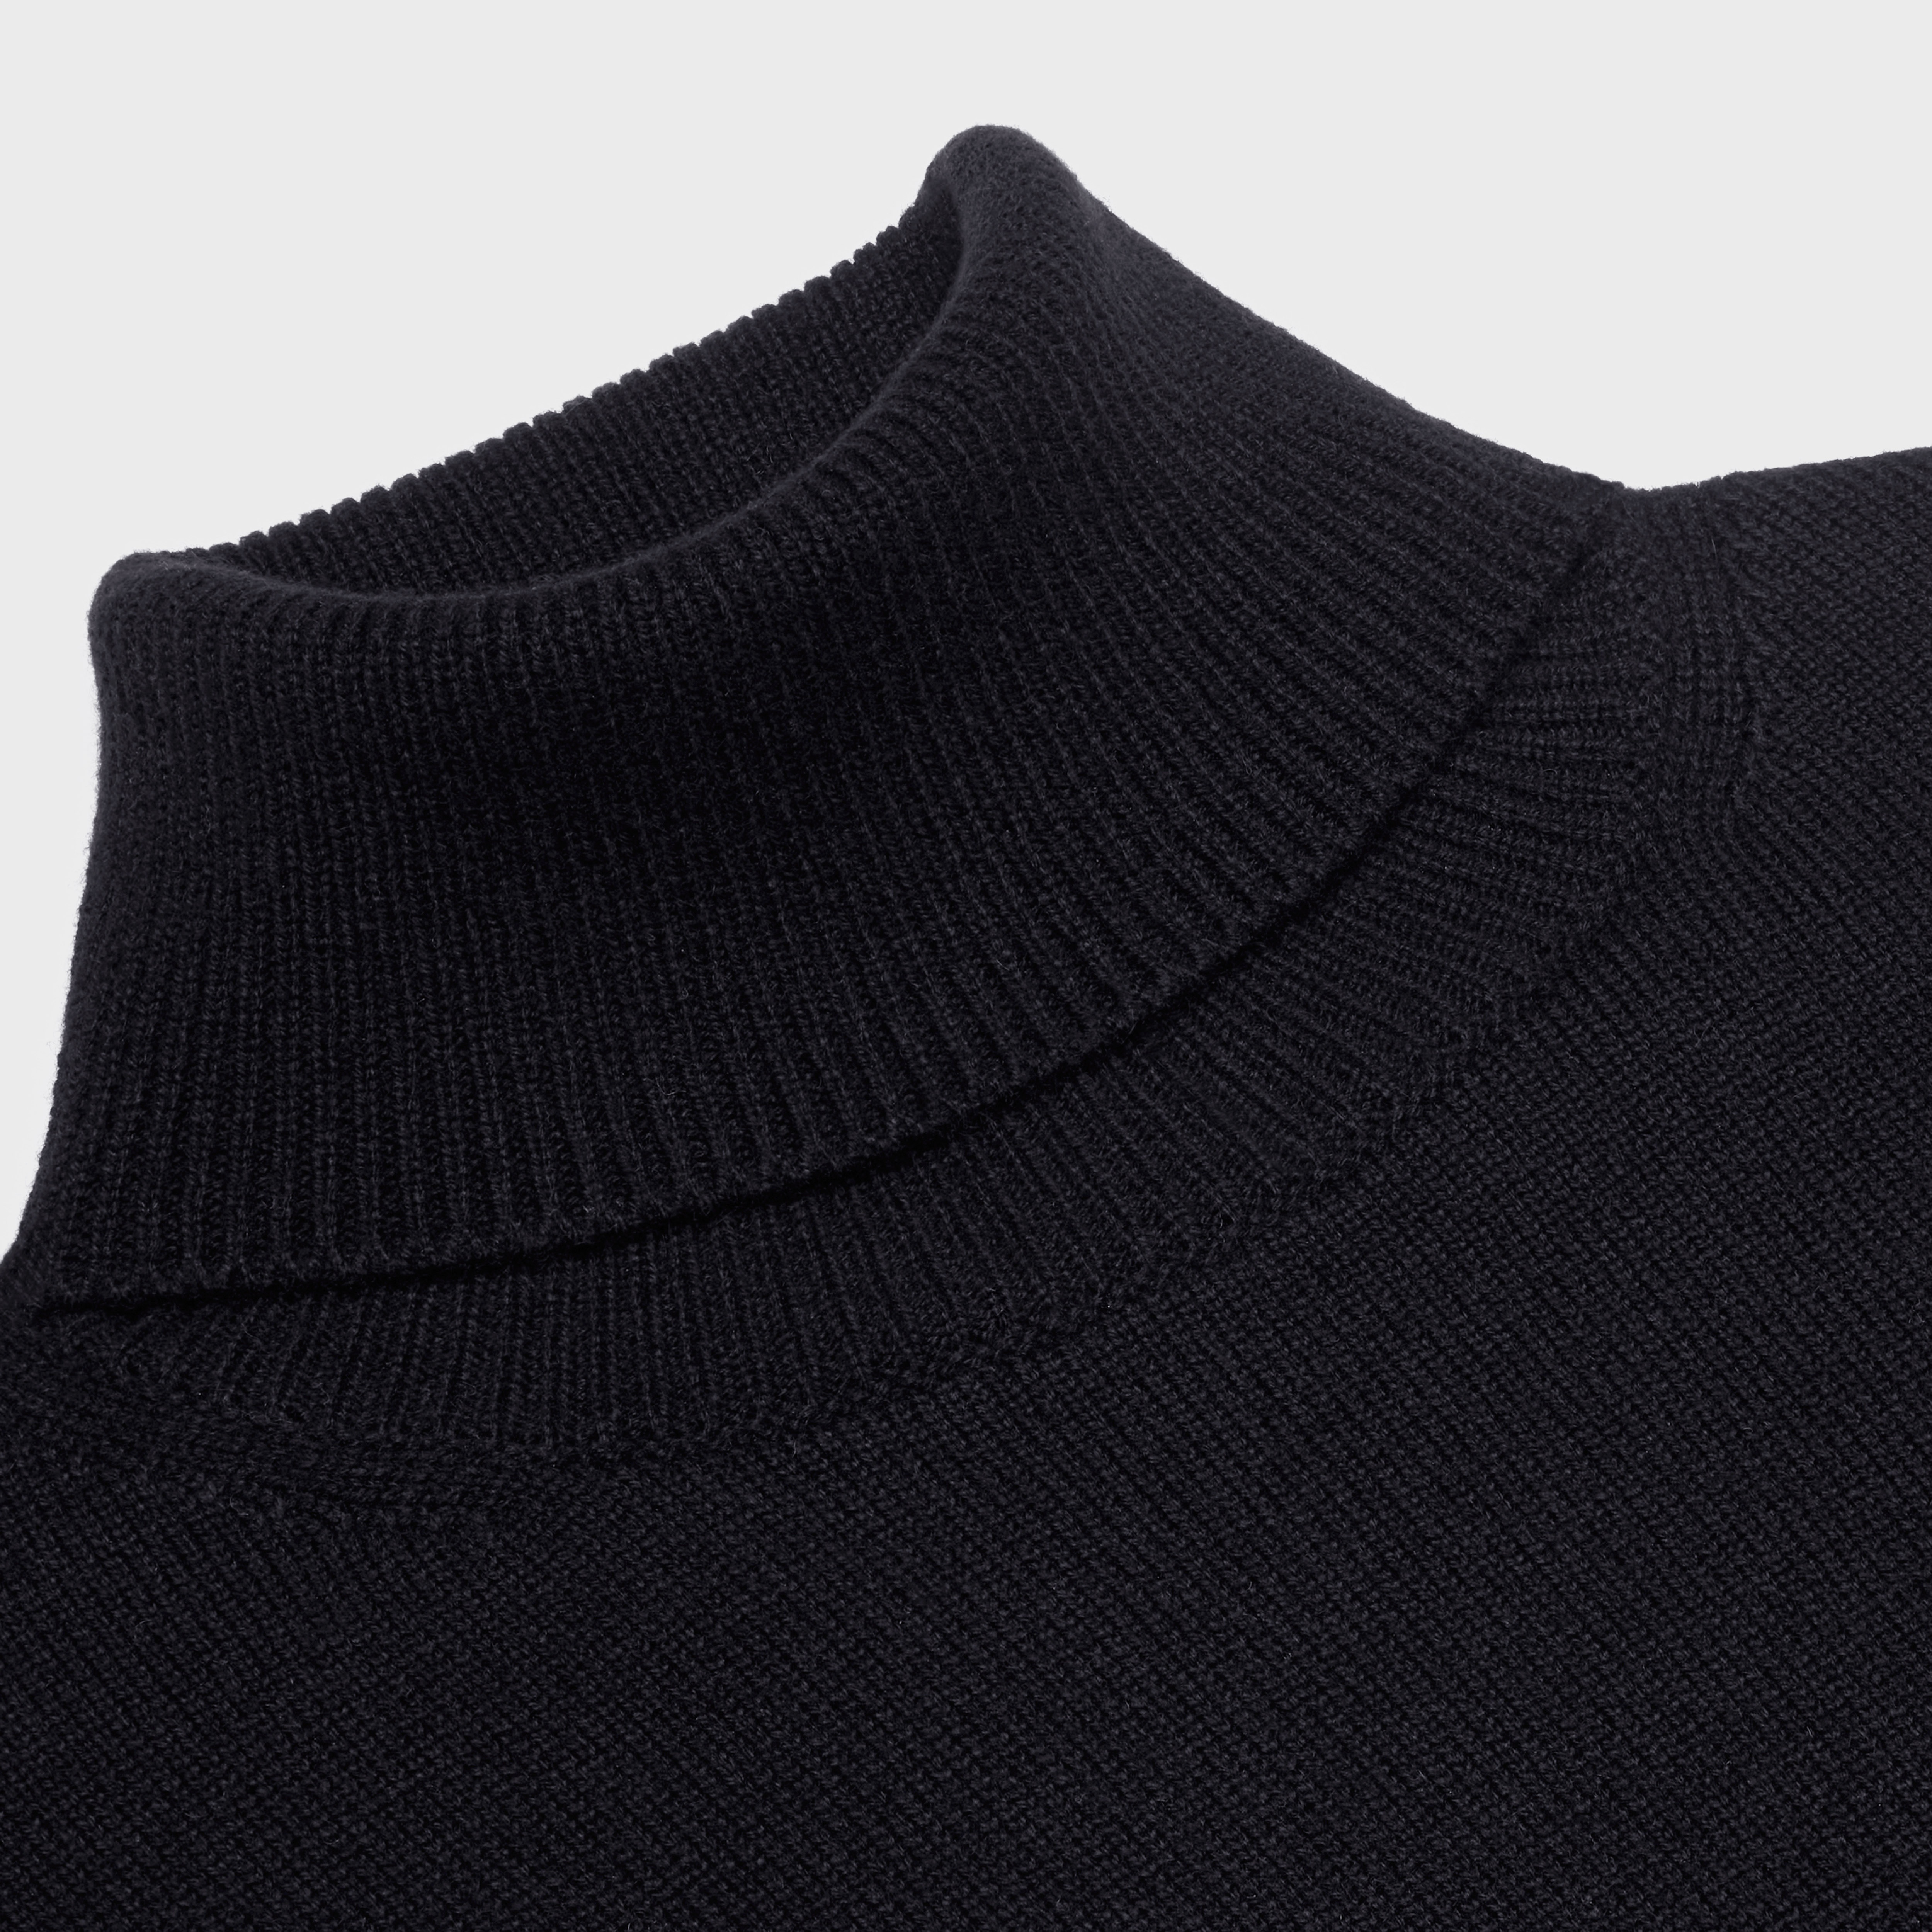 TURTLENECK SWEATER IN HERITAGE CASHMERE - 3